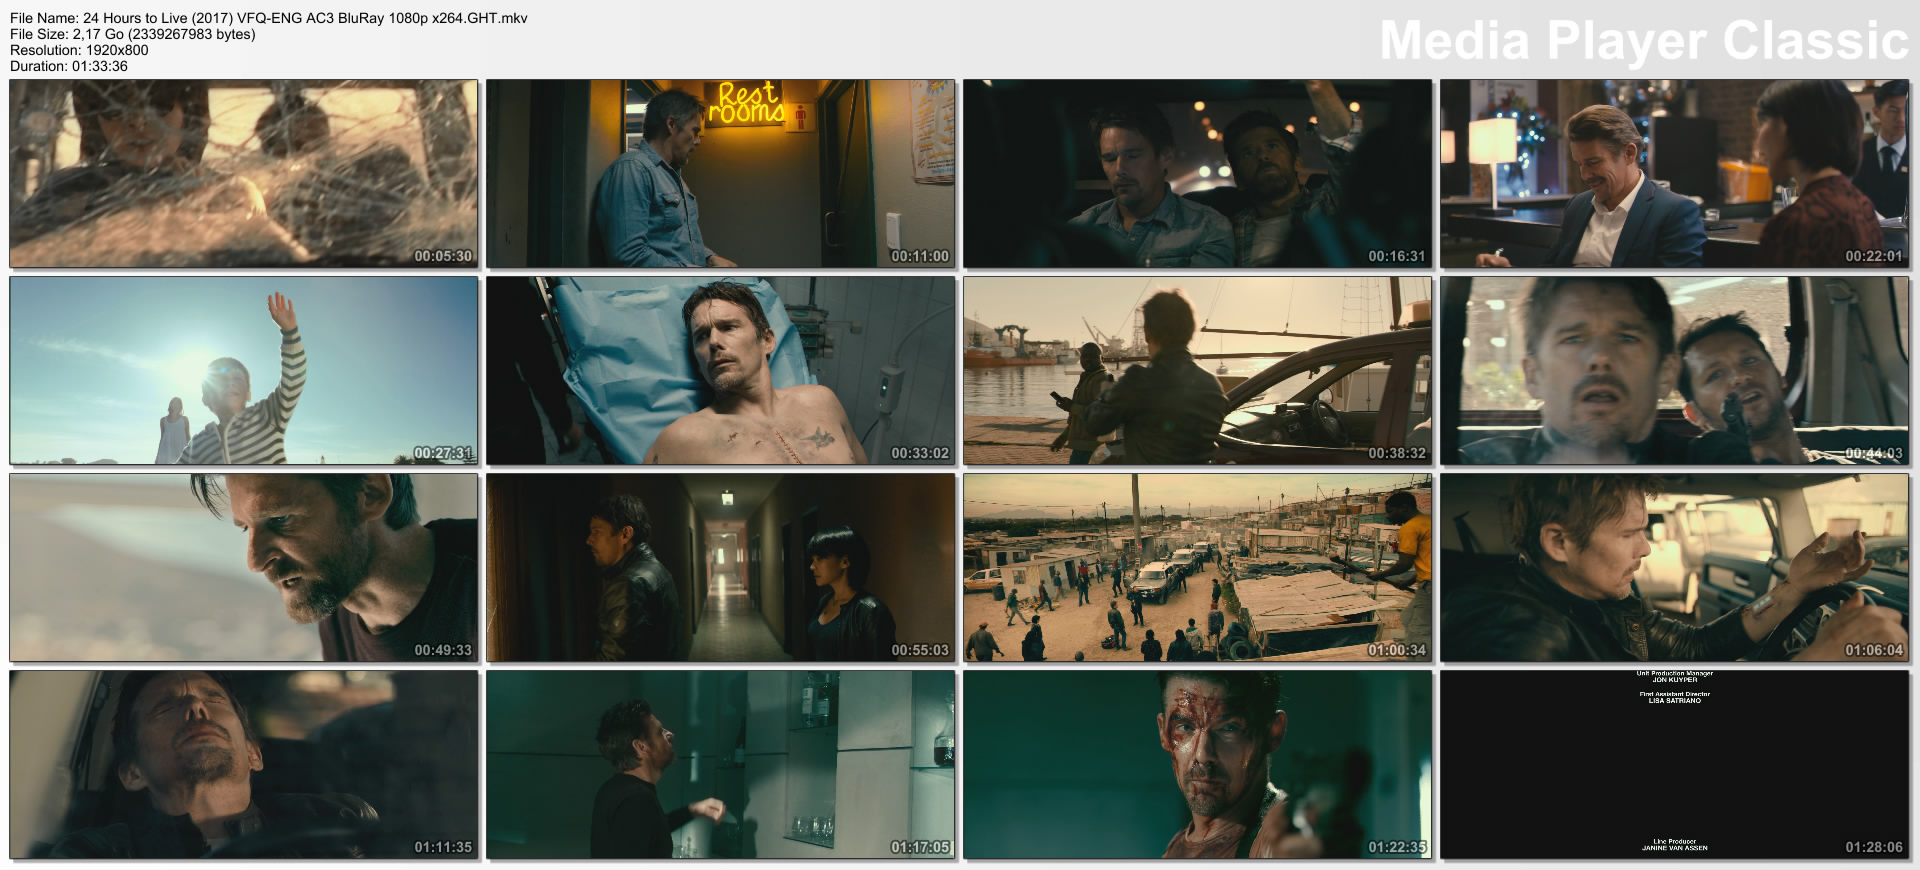 24 Hours to Live (2017) VFQ-ENG AC3 BluRay 1080p x264.GHT